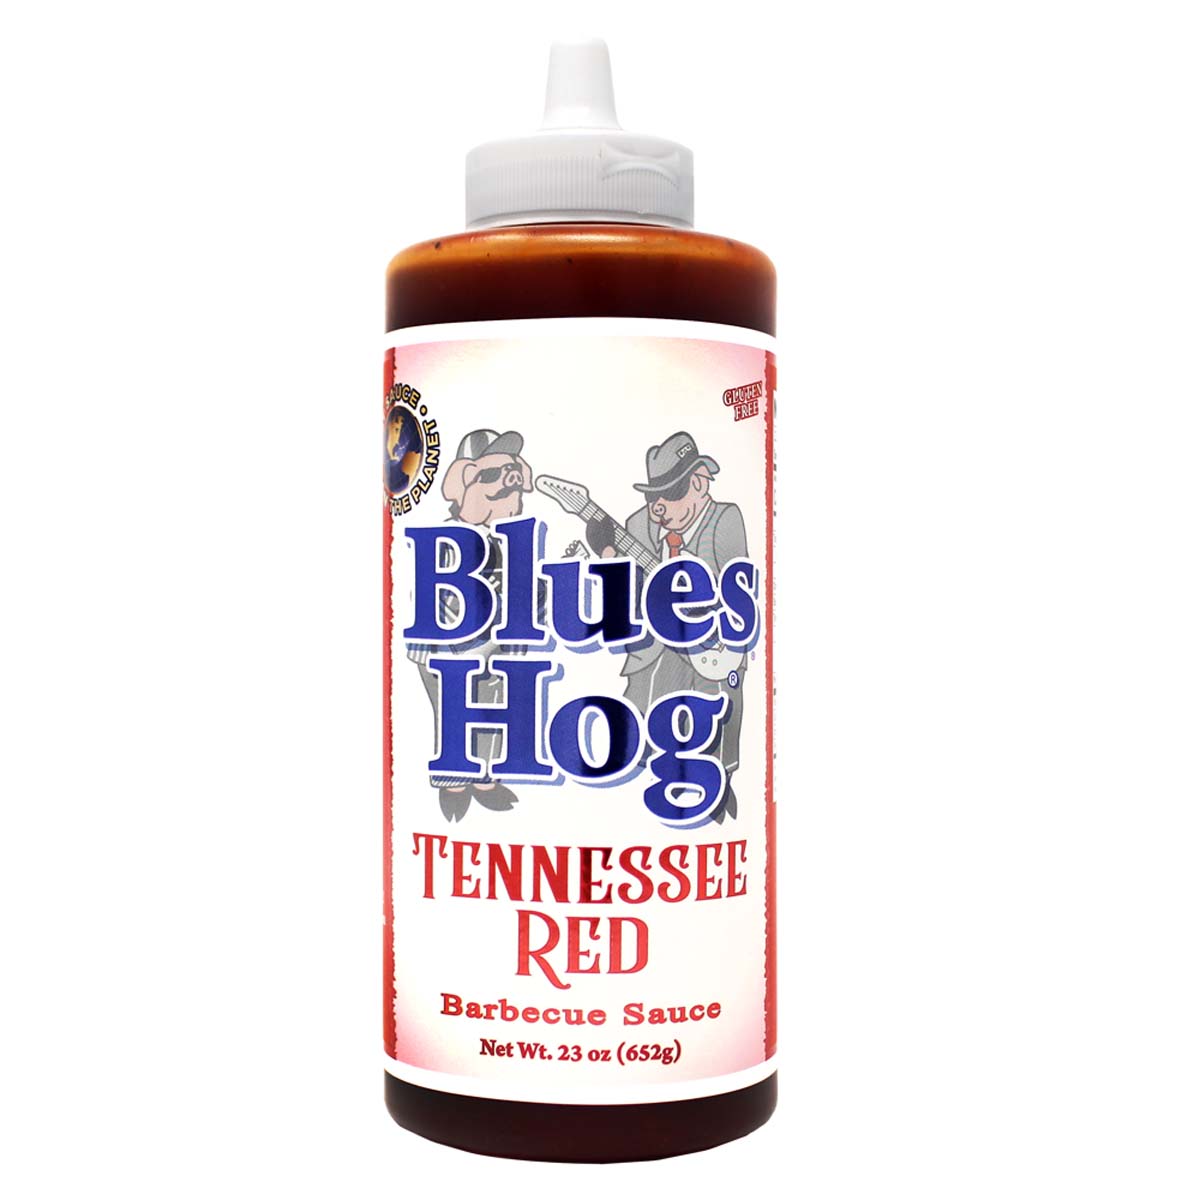 Blues Hog Tennessee Red BBQ Sauce 23oz Squeeze Bottle